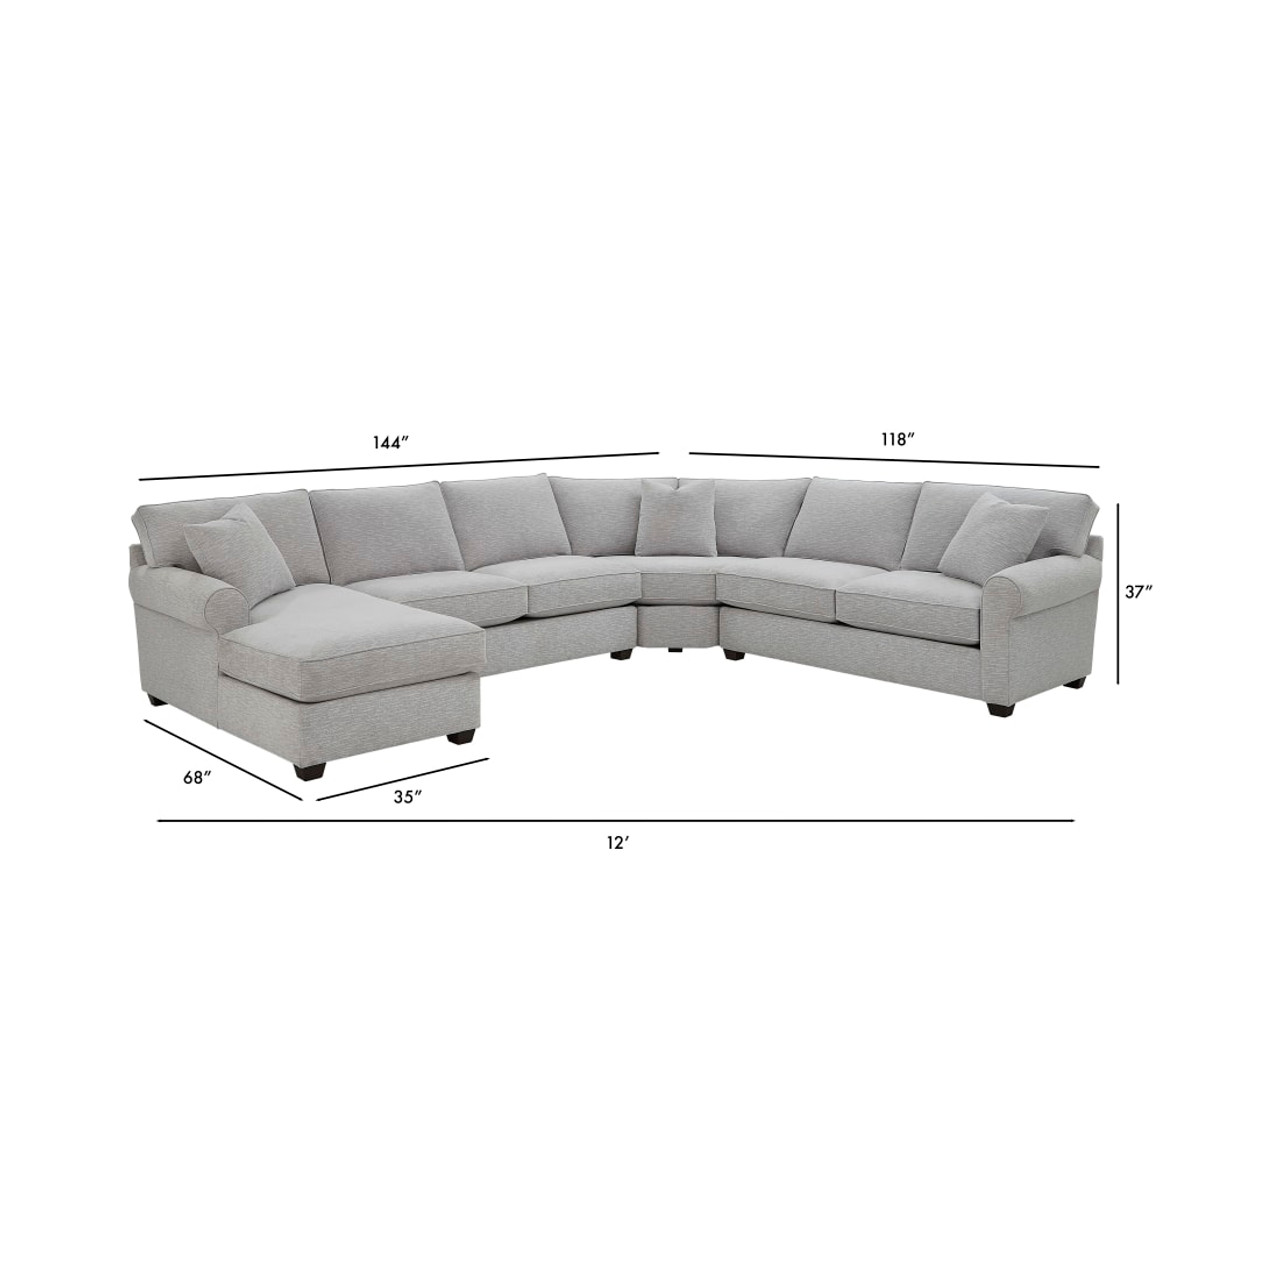 Crestview Rolled Arm Granite 4-pc sectional w/ left chaise